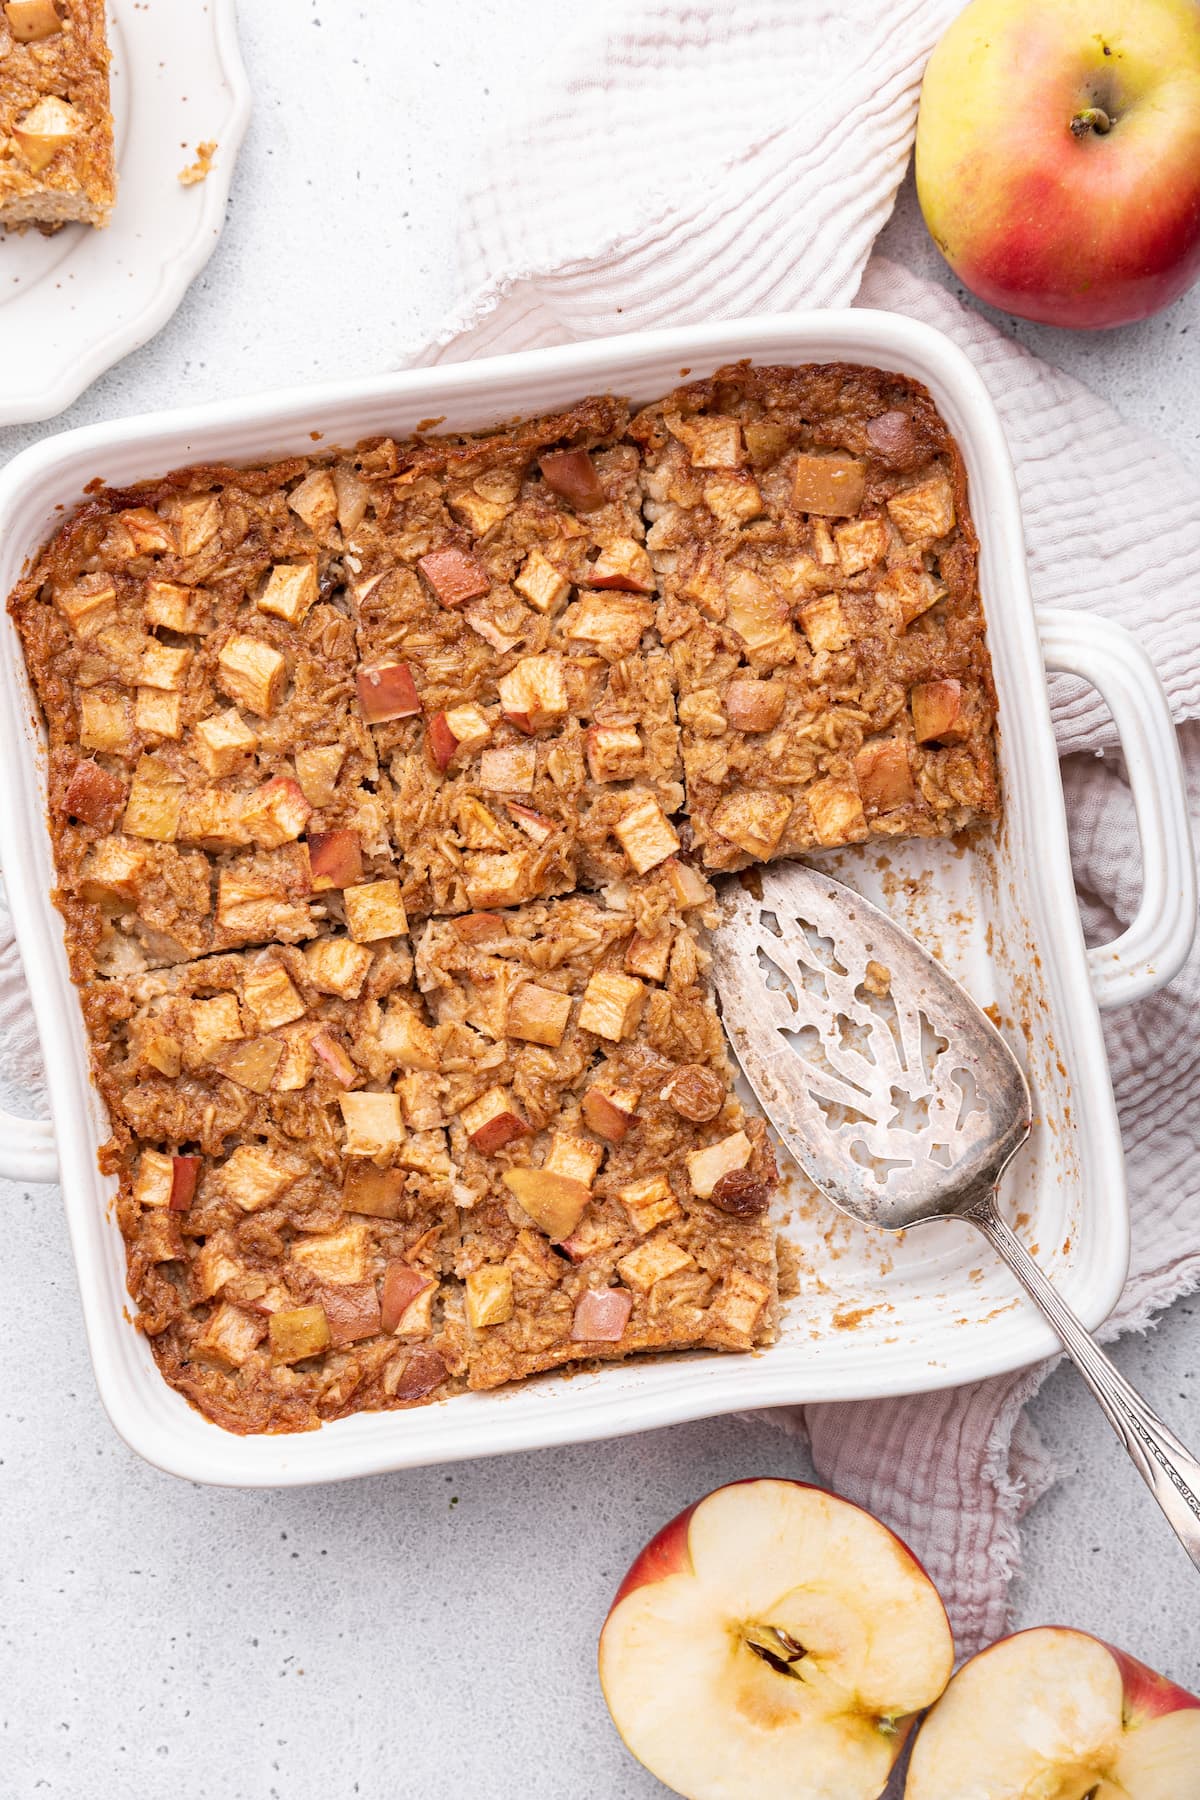 Apple cinnamon baked oatmeal in a square baking dish with a serving spatula and a piece missing.